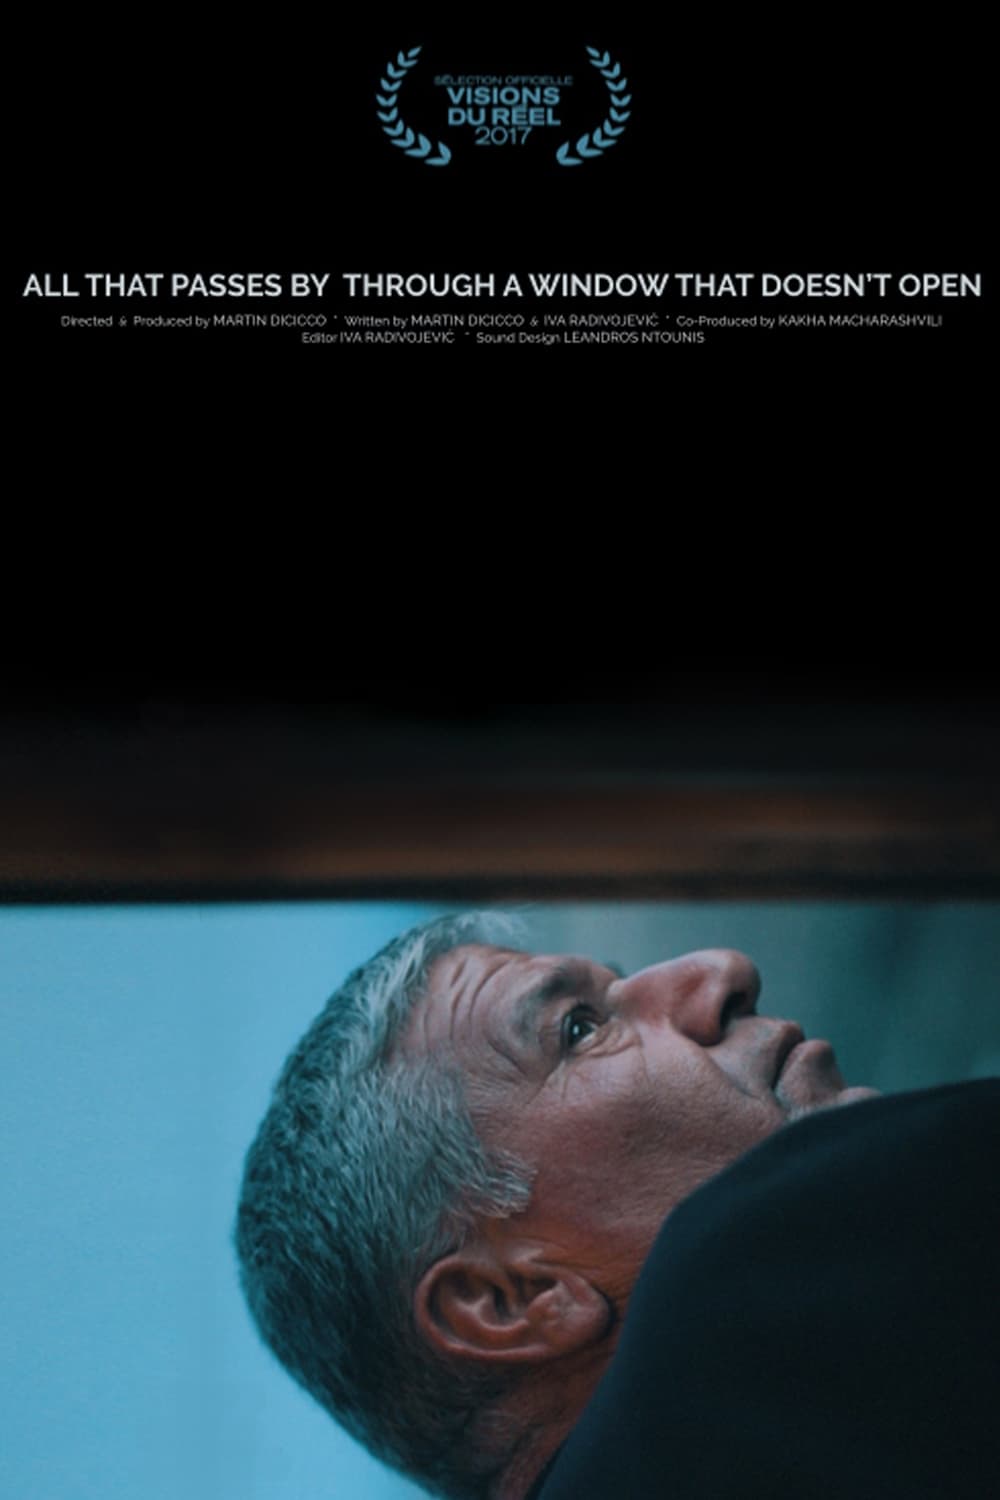 All That Passes by Through a Window That Doesn't Open